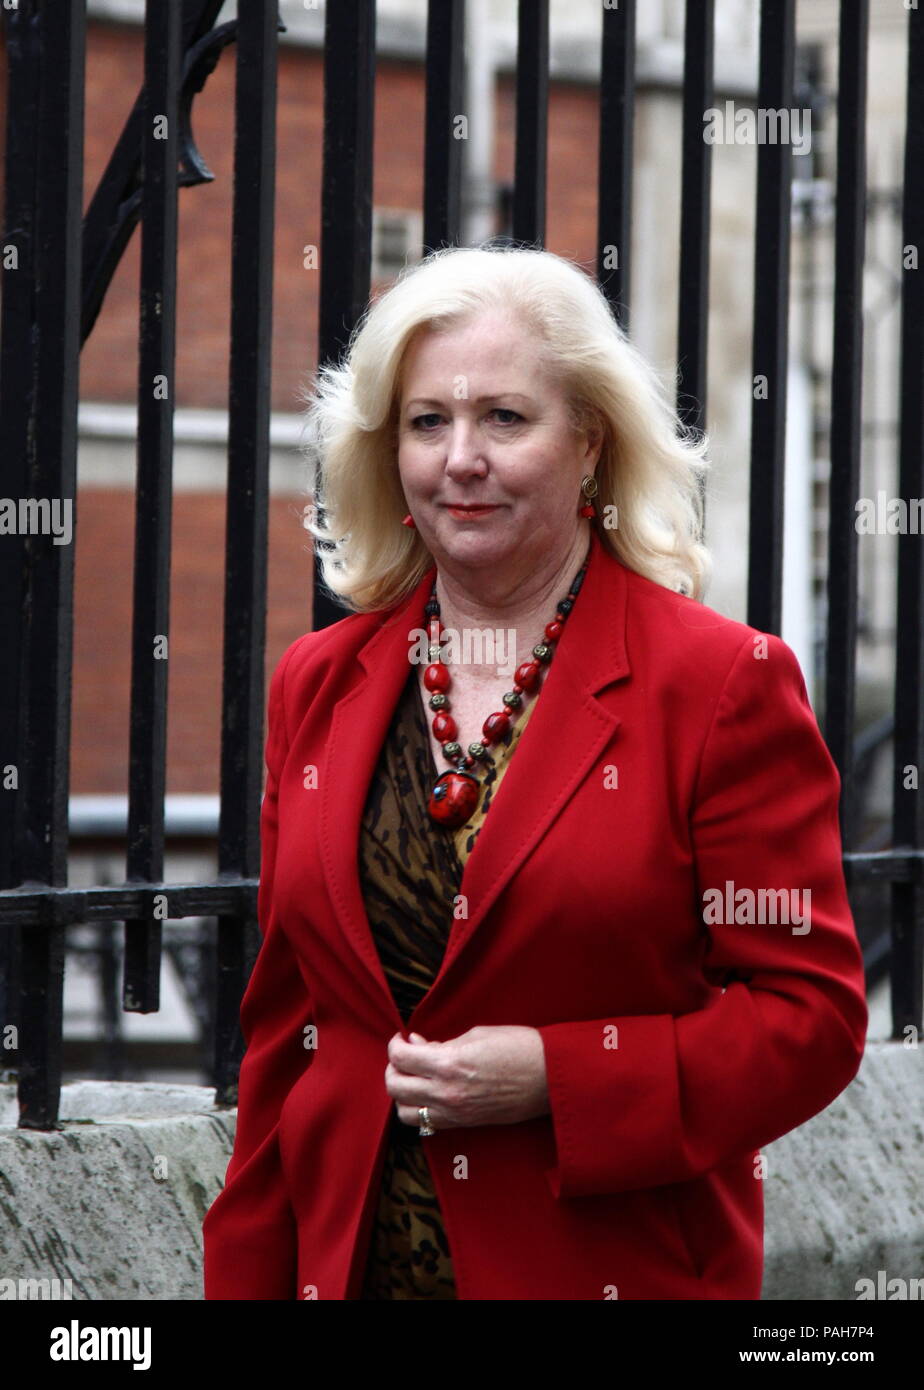 Mary Ellen Fields about to attend the Leveson inquiry at the Royal Courts of Justice in the Strand, London, UK. Mary Ellen Fields was sacked by super model Elle Macpherson re- leaks about the models life. Stock Photo